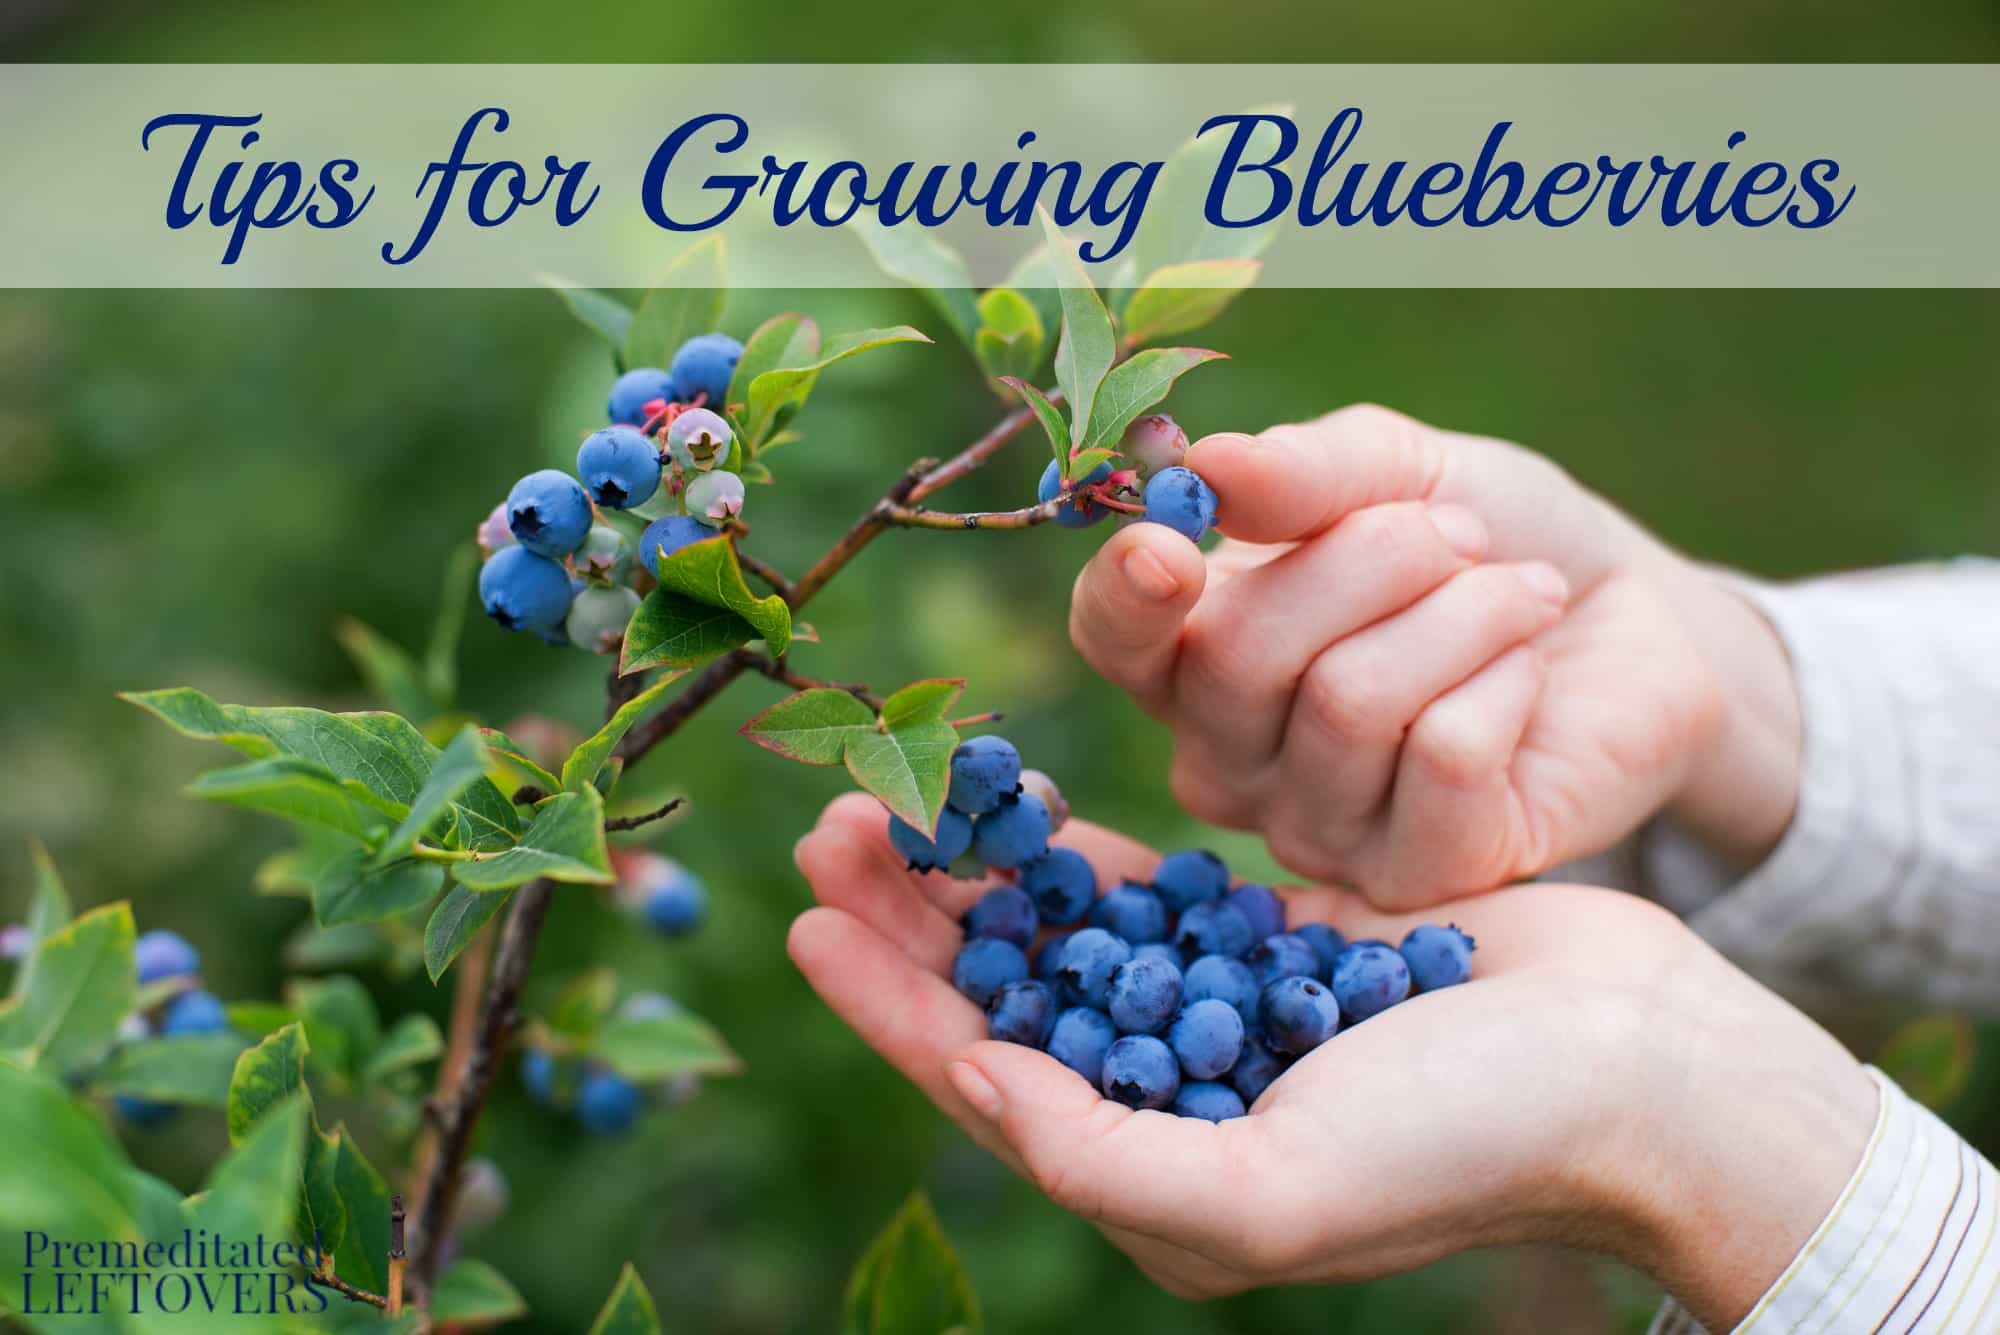 These tips for growing blueberries include everything from planting to harvest, including growing blueberries in containers